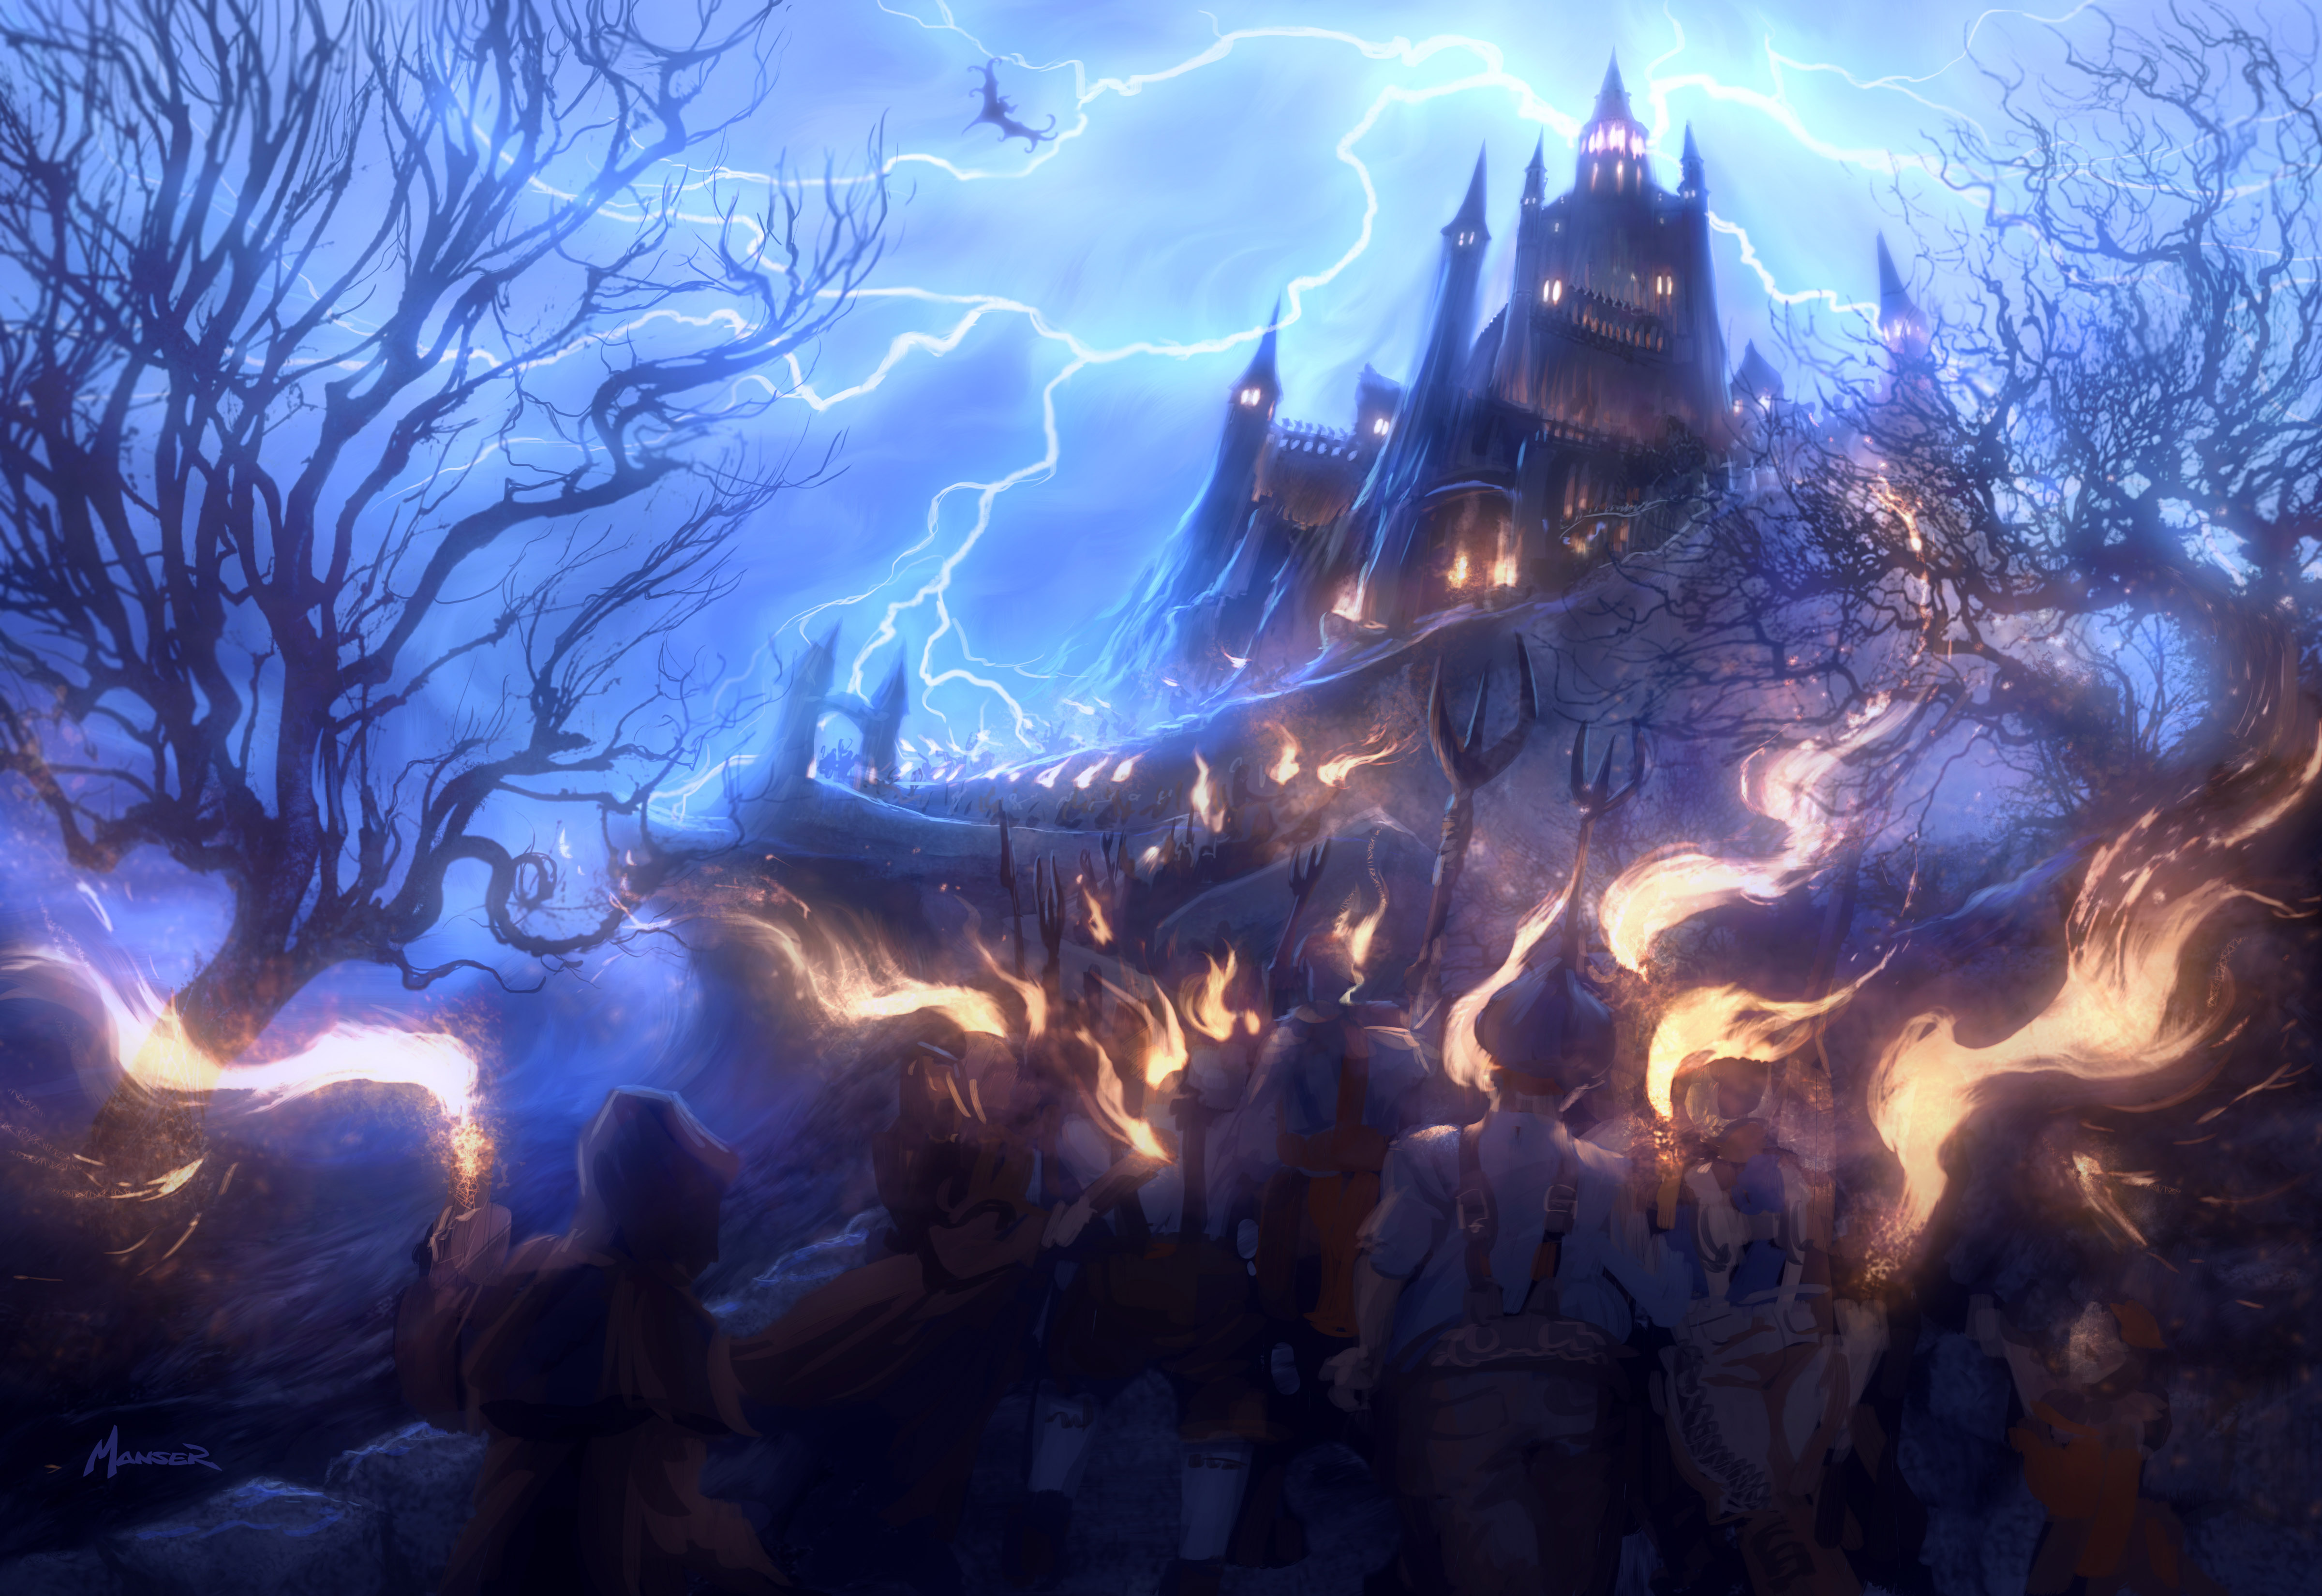 Behold! The House of Monsters! Concept artwork by Warren Manser.